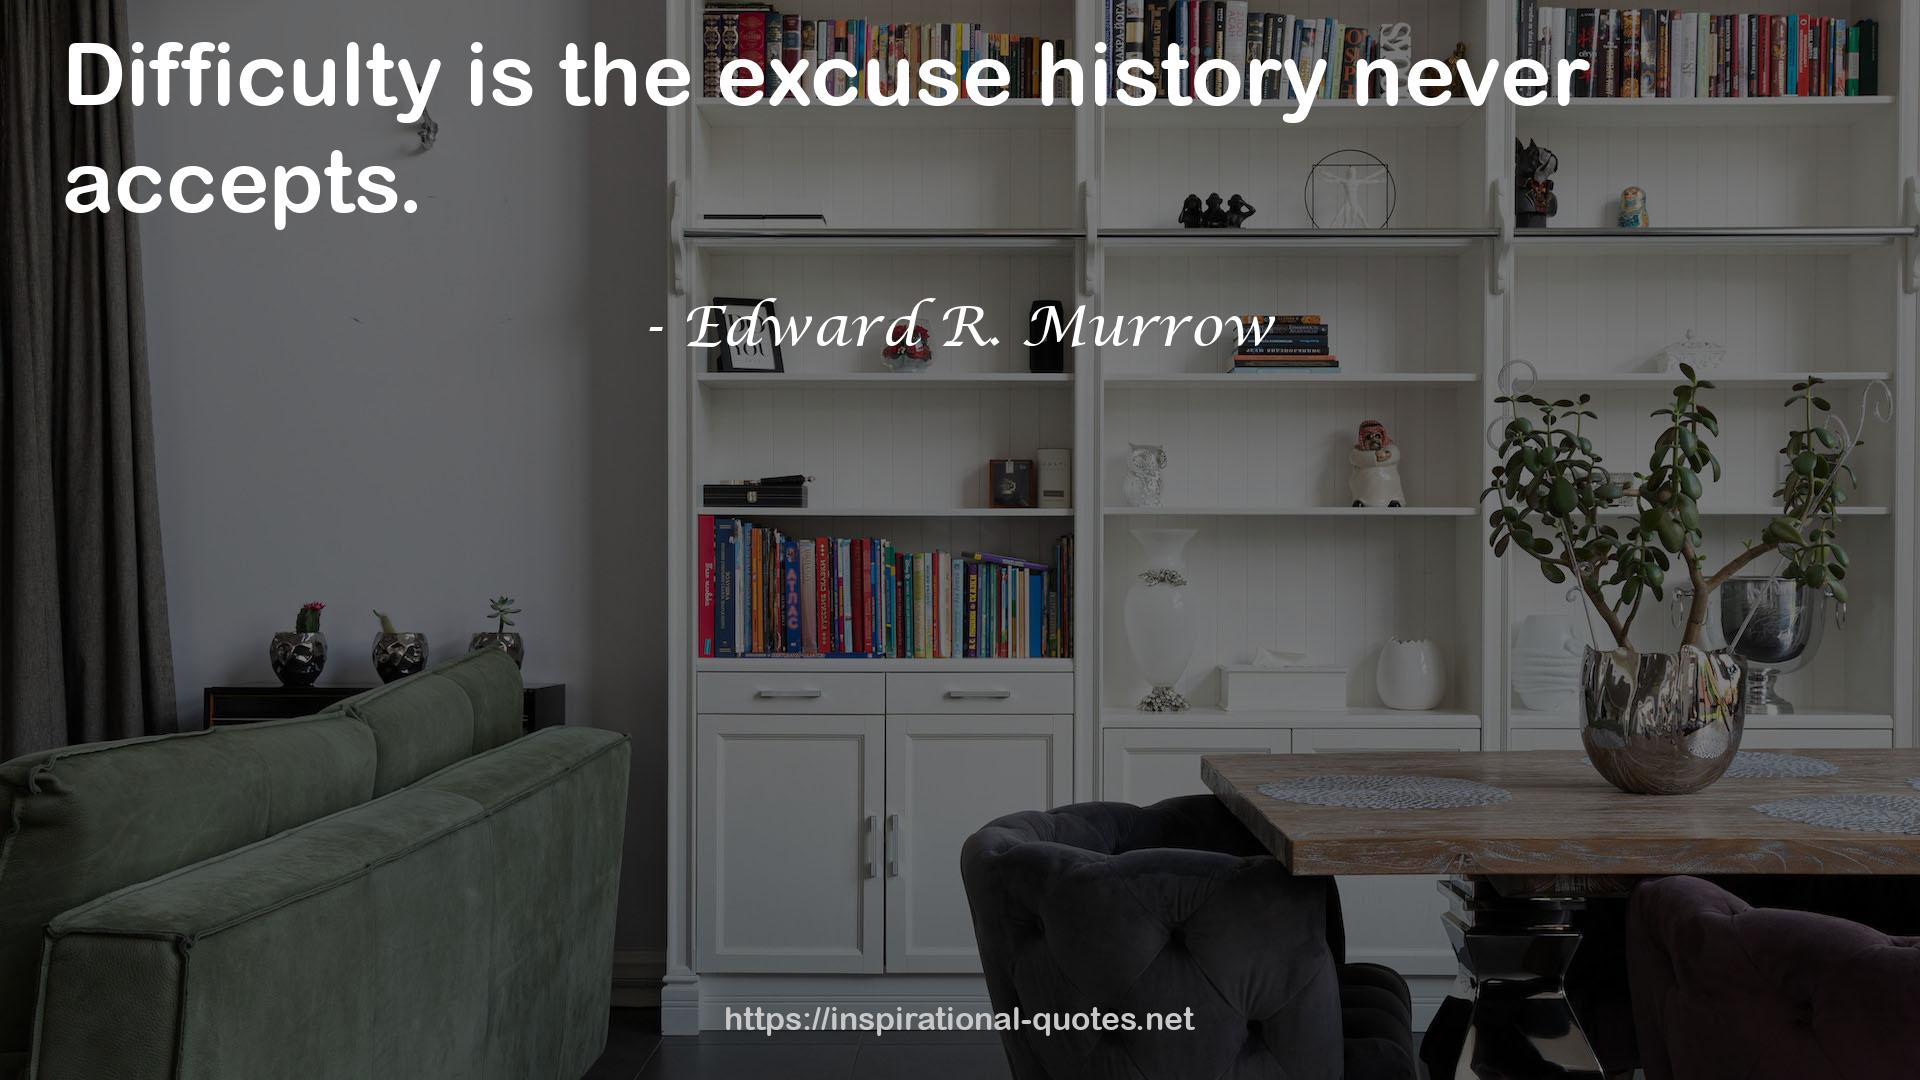 Edward R. Murrow QUOTES